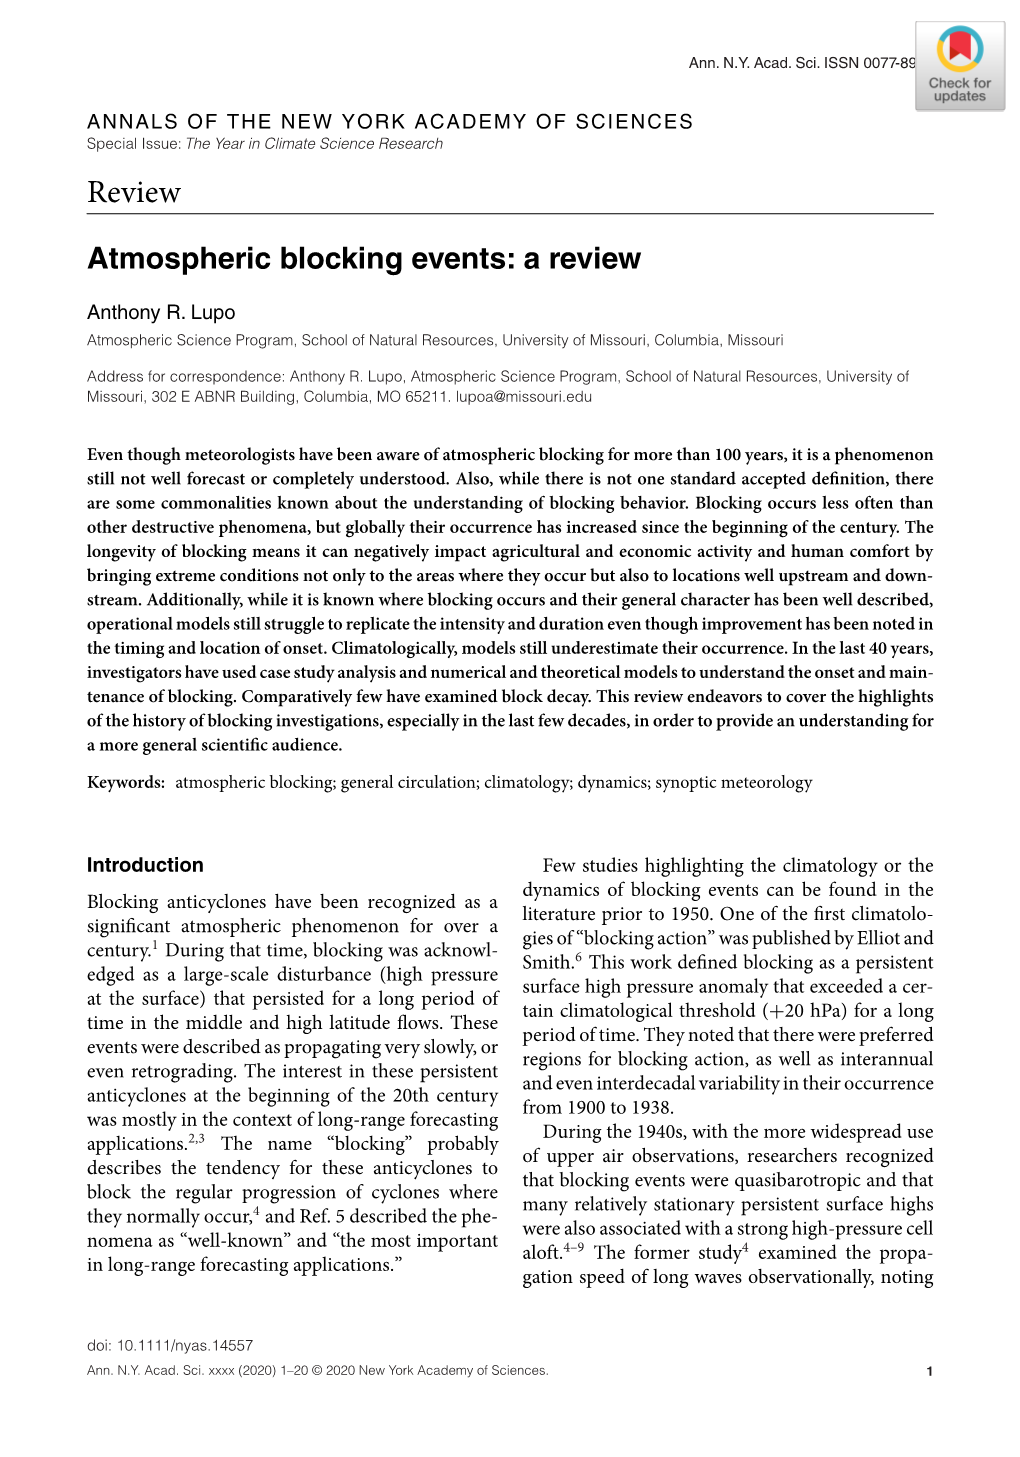 Atmospheric Blocking Events: a Review